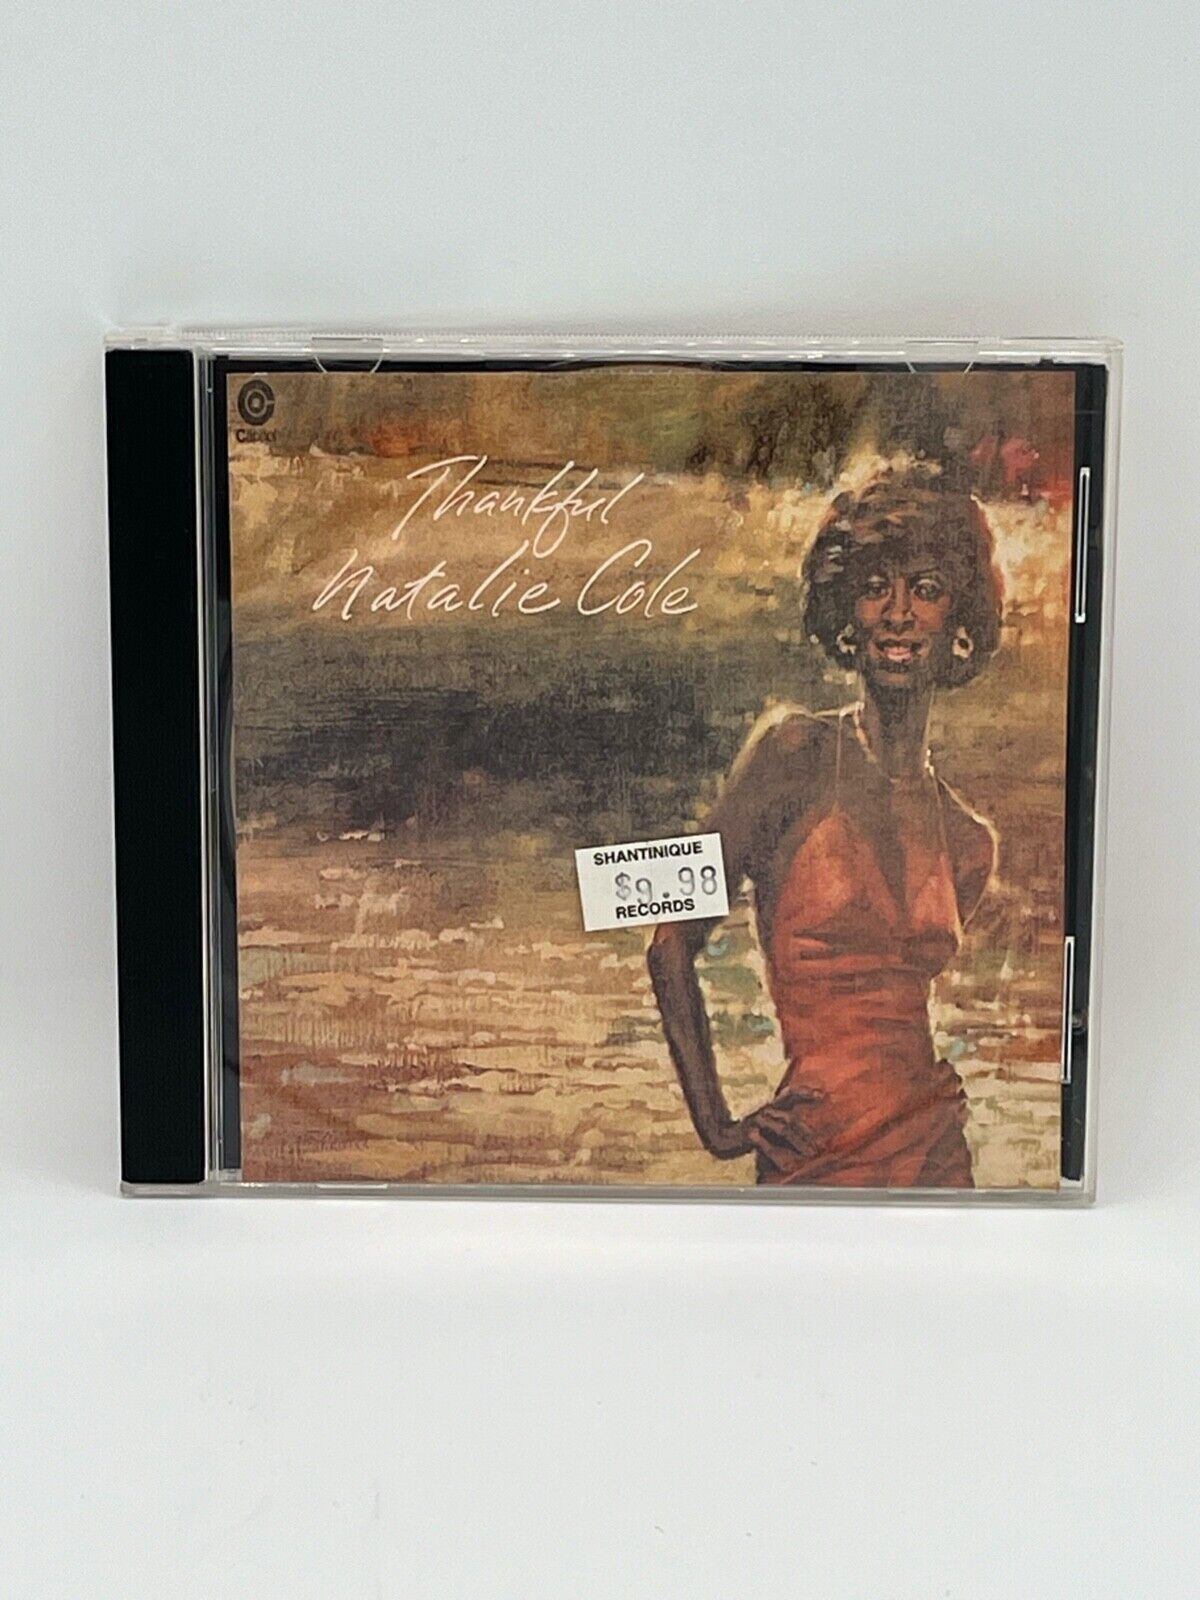 Thankful Natalie Cole CD Expanded Album Pre-Owned Very Good